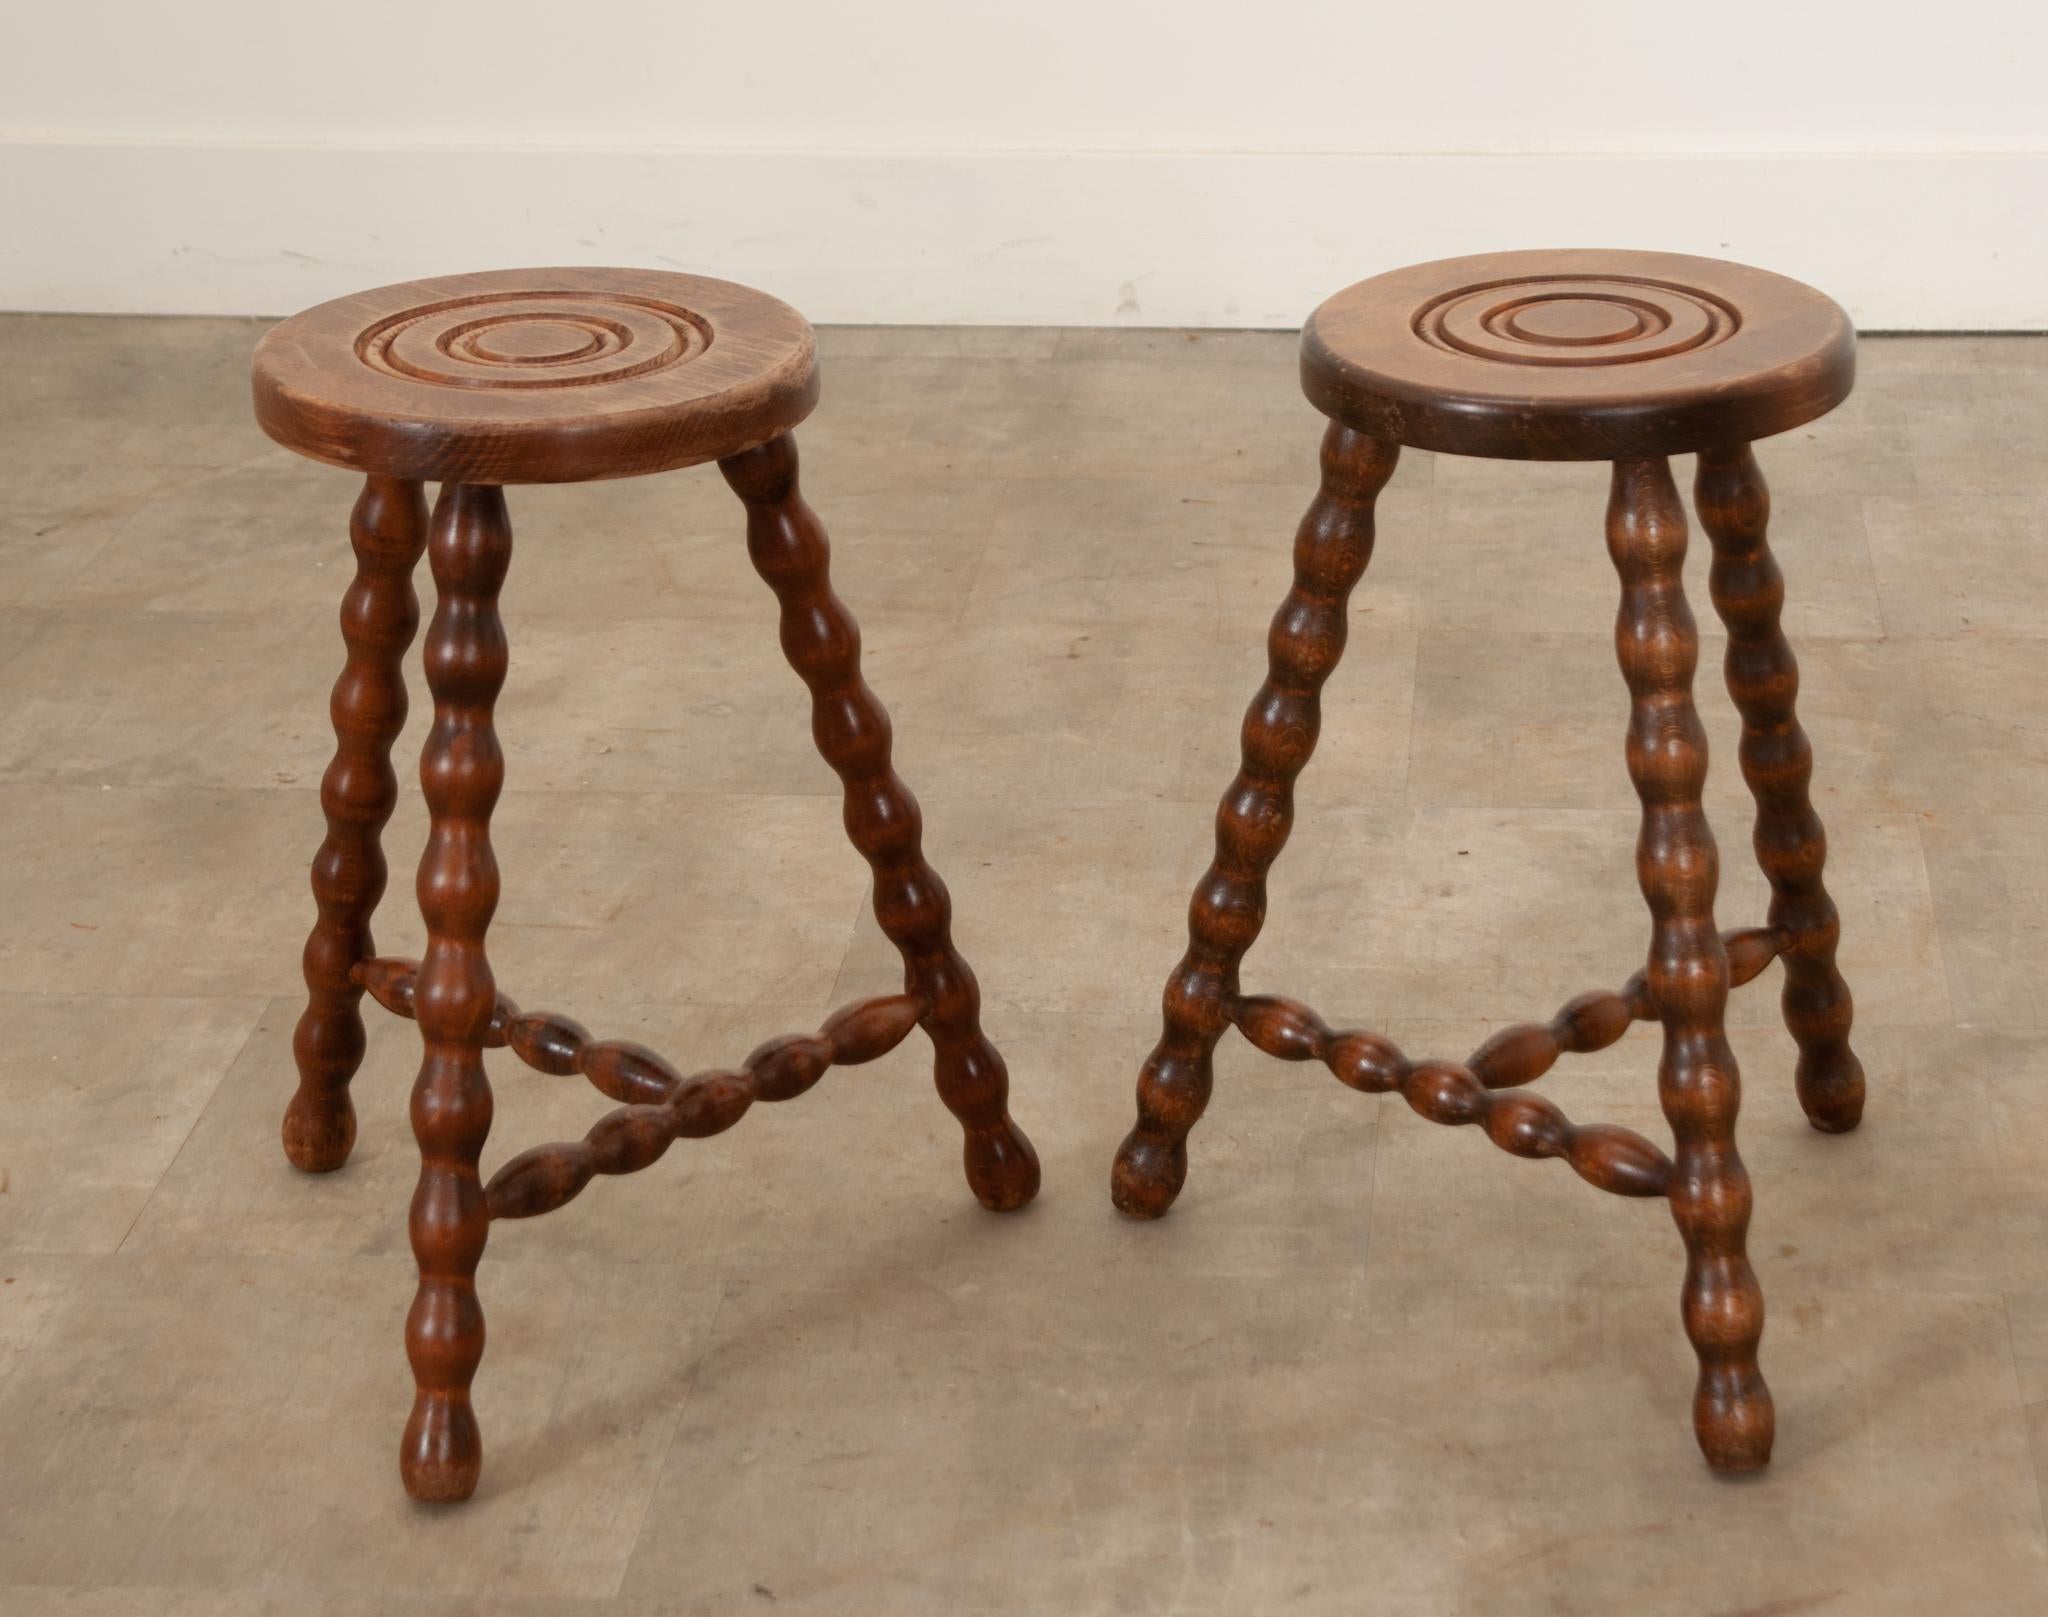 Direct from France, a pair of superb hand-carved vintage French stools. This distinctive pair of stools has attractive, relief carved tops featuring a double circular design pattern. Splayed “bobbin” turned legs and cross stretchers, gorgeous wood